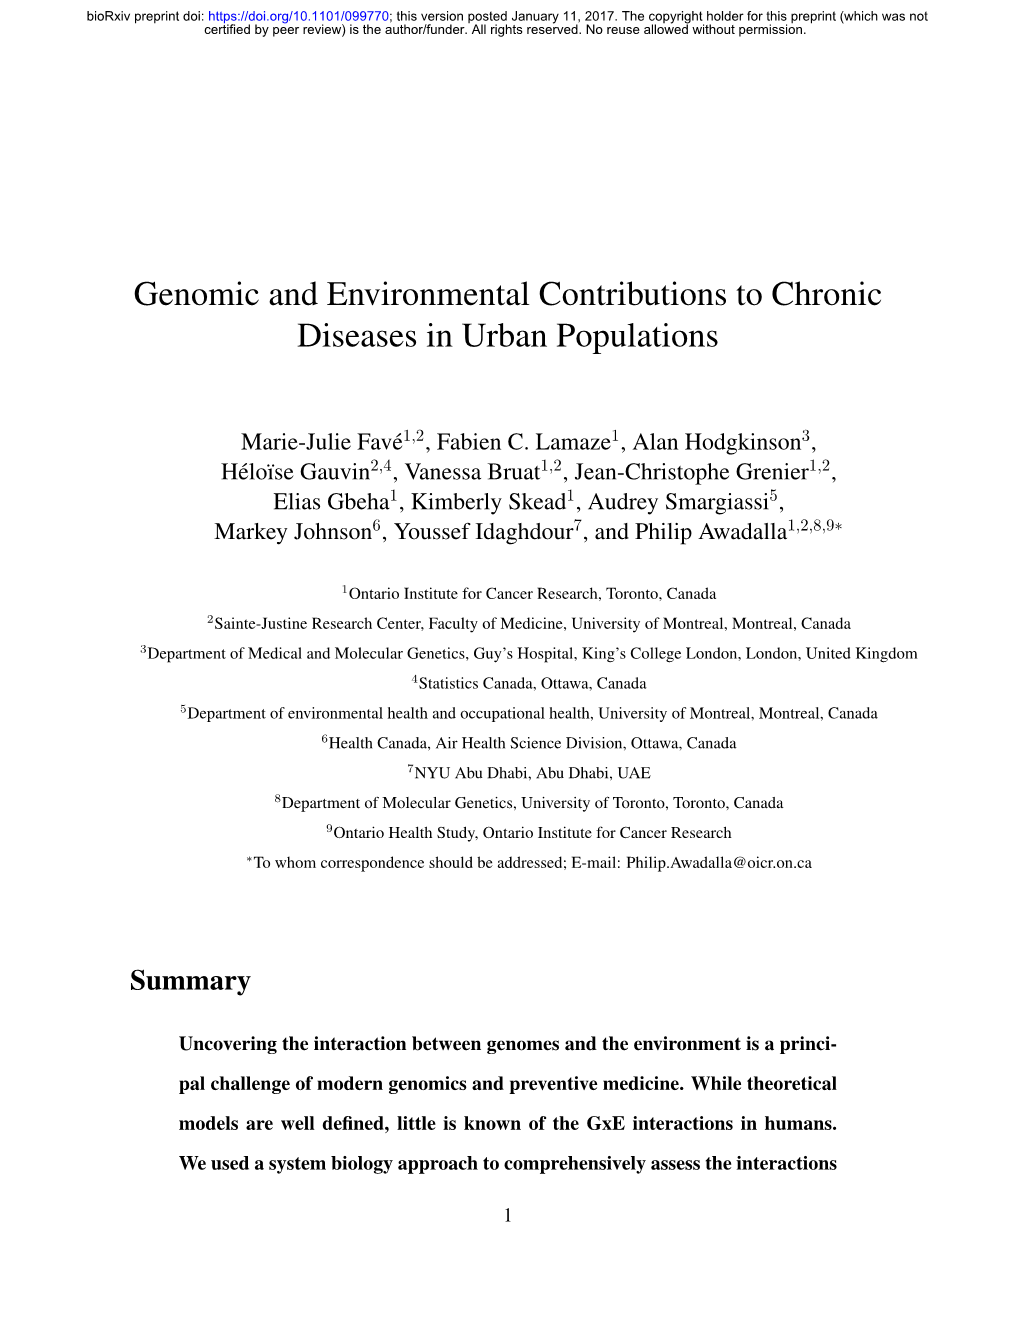 Genomic and Environmental Contributions to Chronic Diseases in Urban Populations